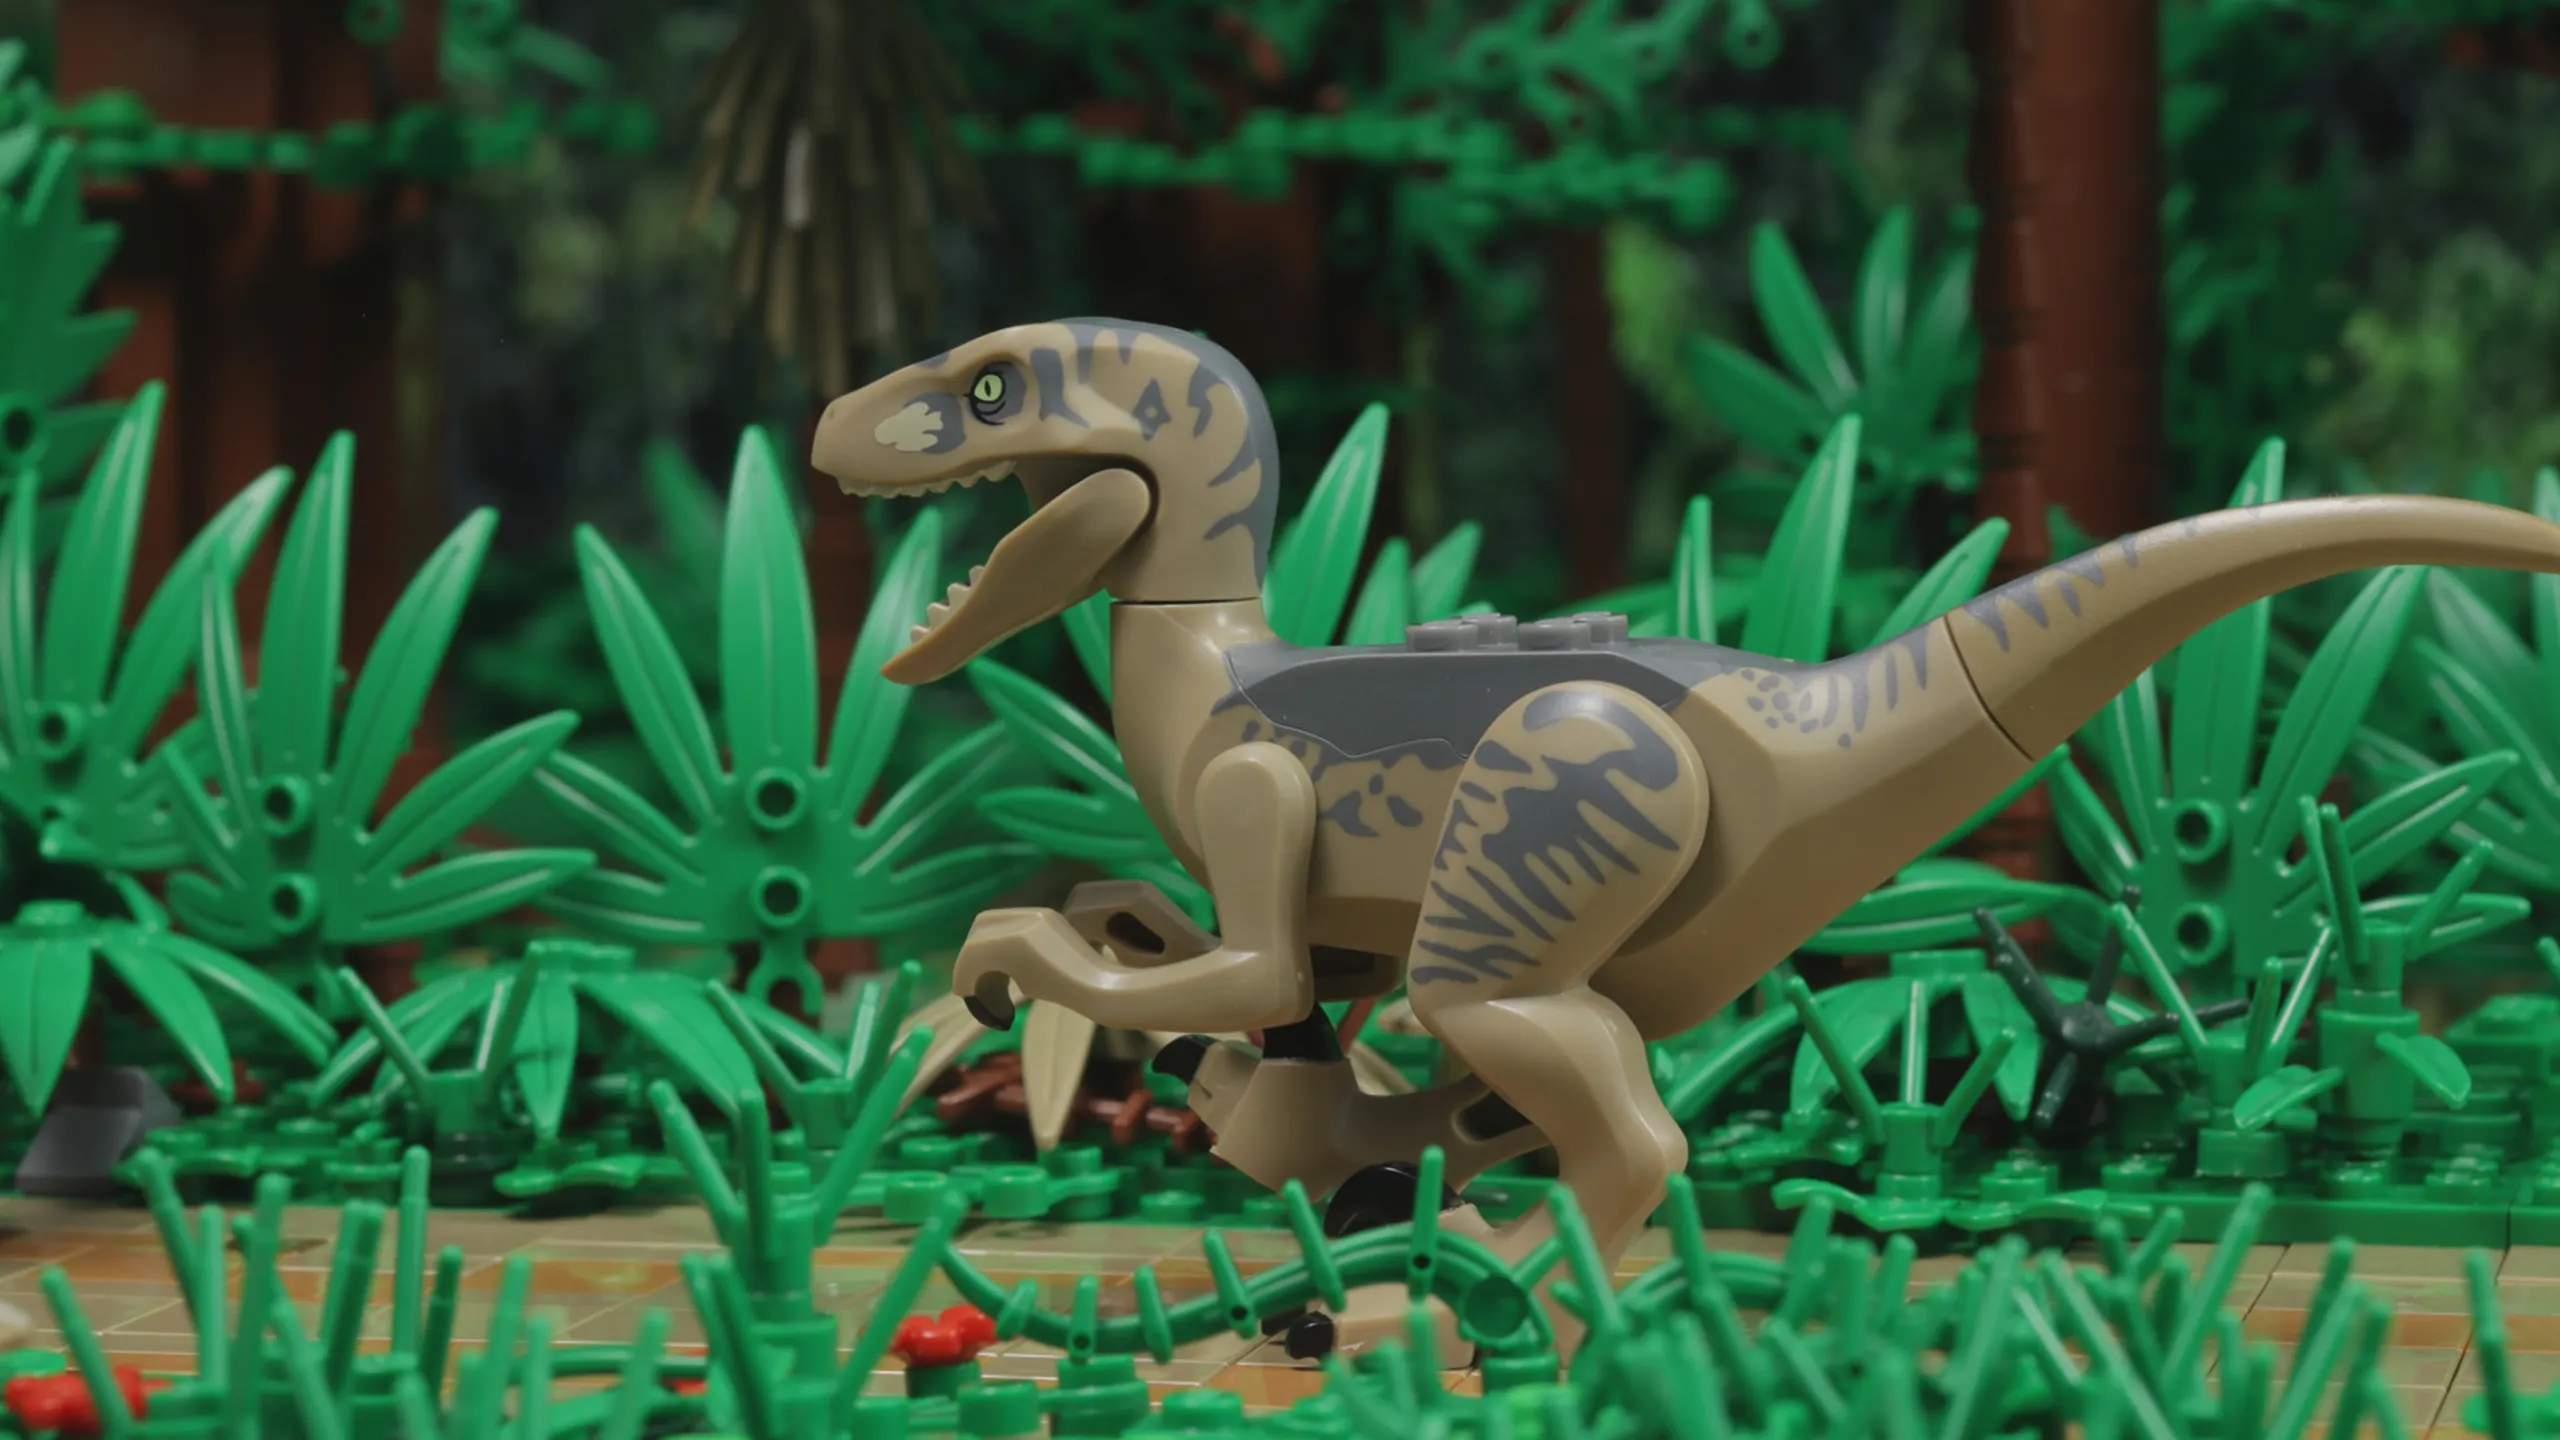 Here's the Lego Jurassic World You've Been Waiting For